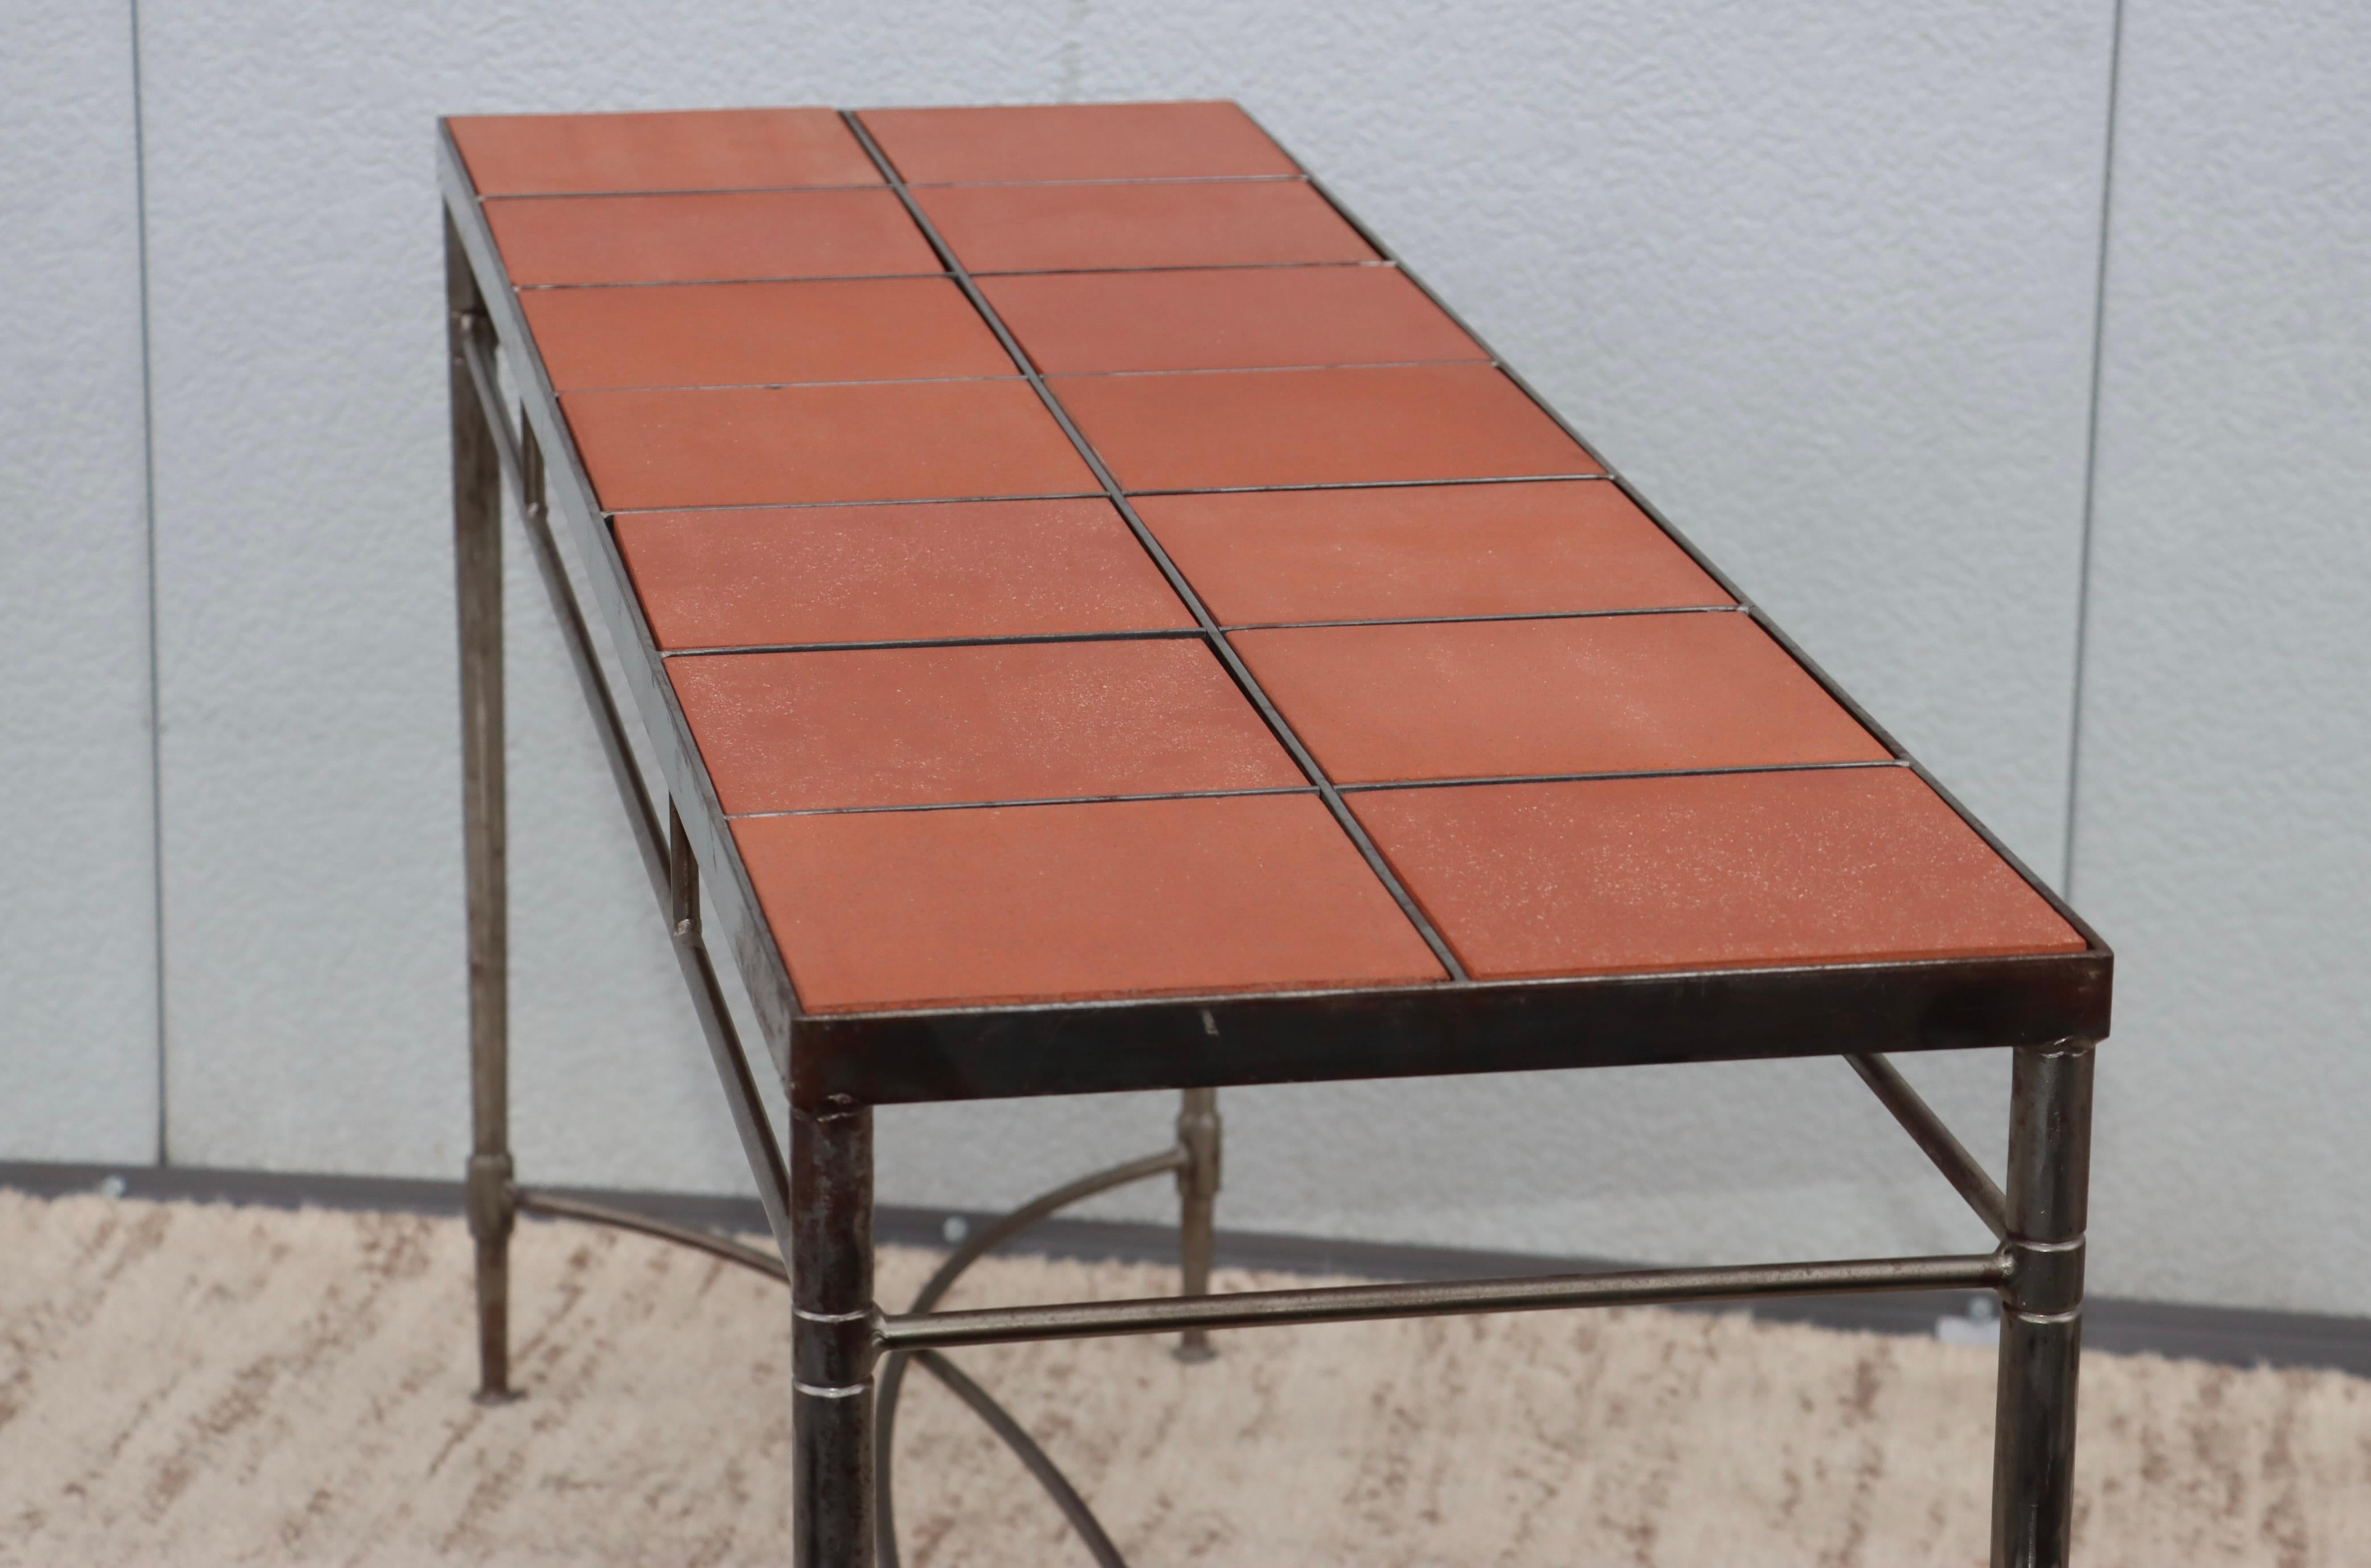 1970's Italian Iron Console Table with Impruneta Terracotta Tile Inserts For Sale 8